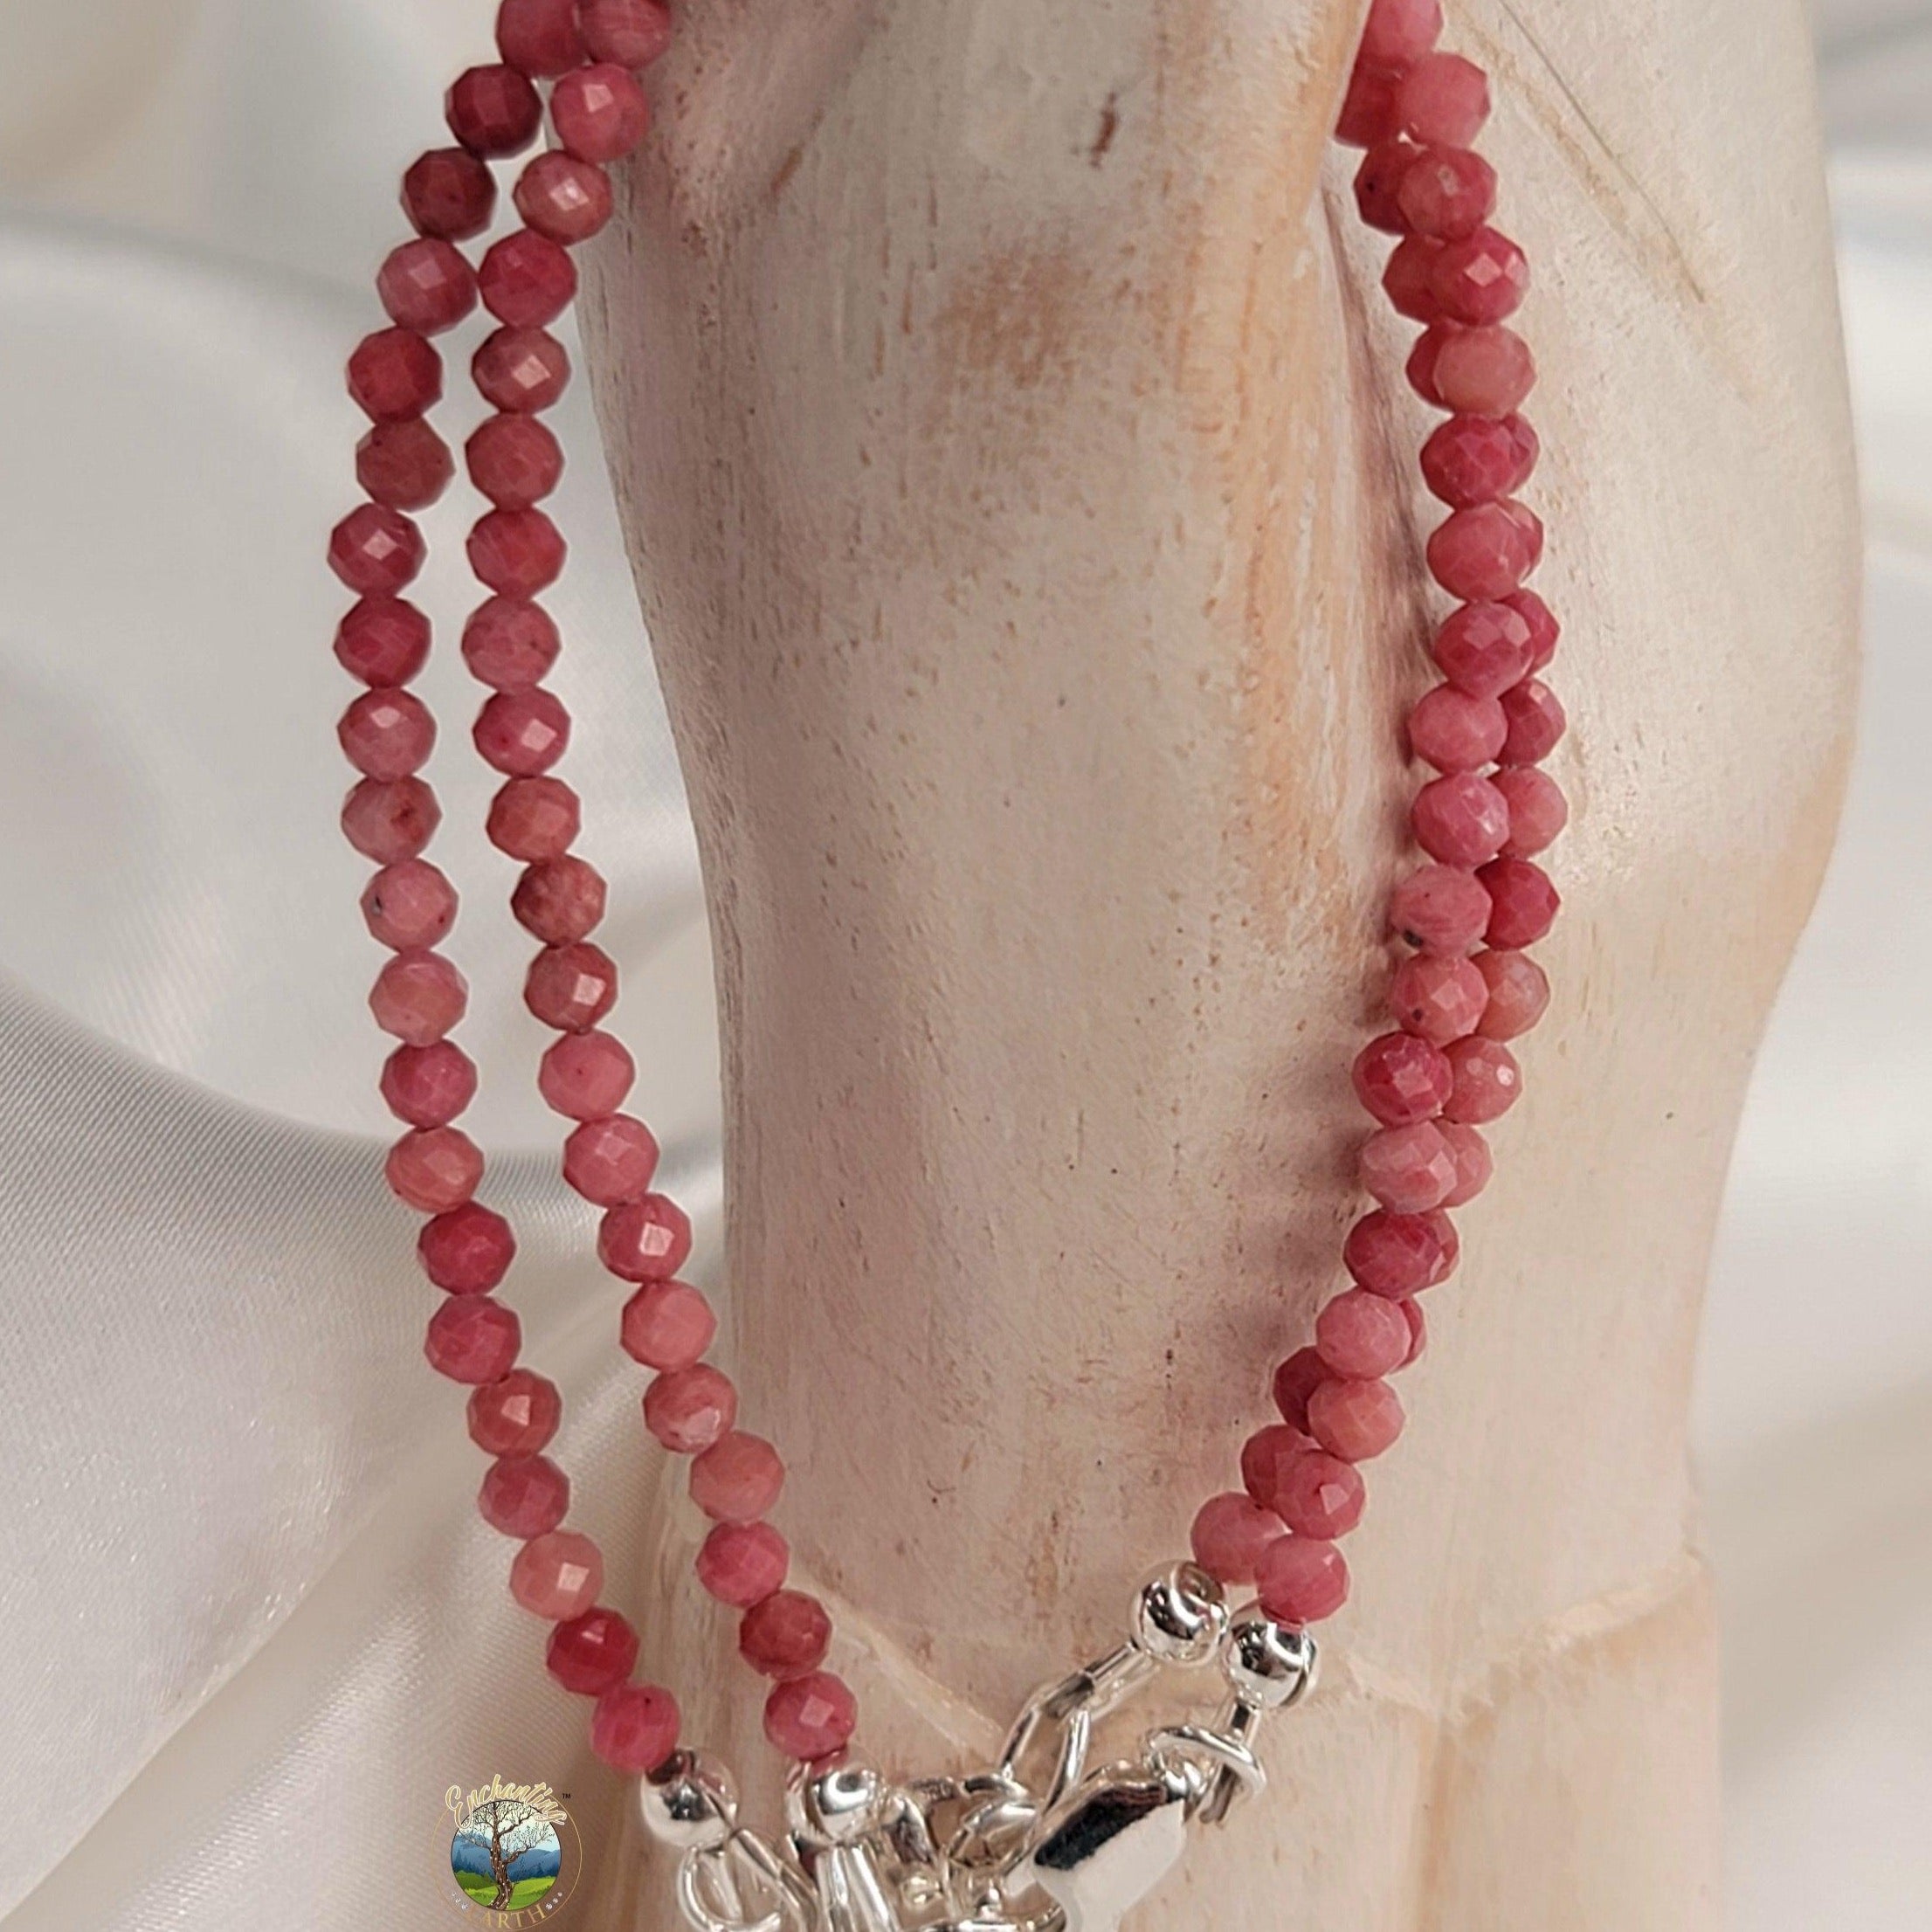 Rhodonite Micro Faceted Bracelet for Attraction, Love and Self Worth